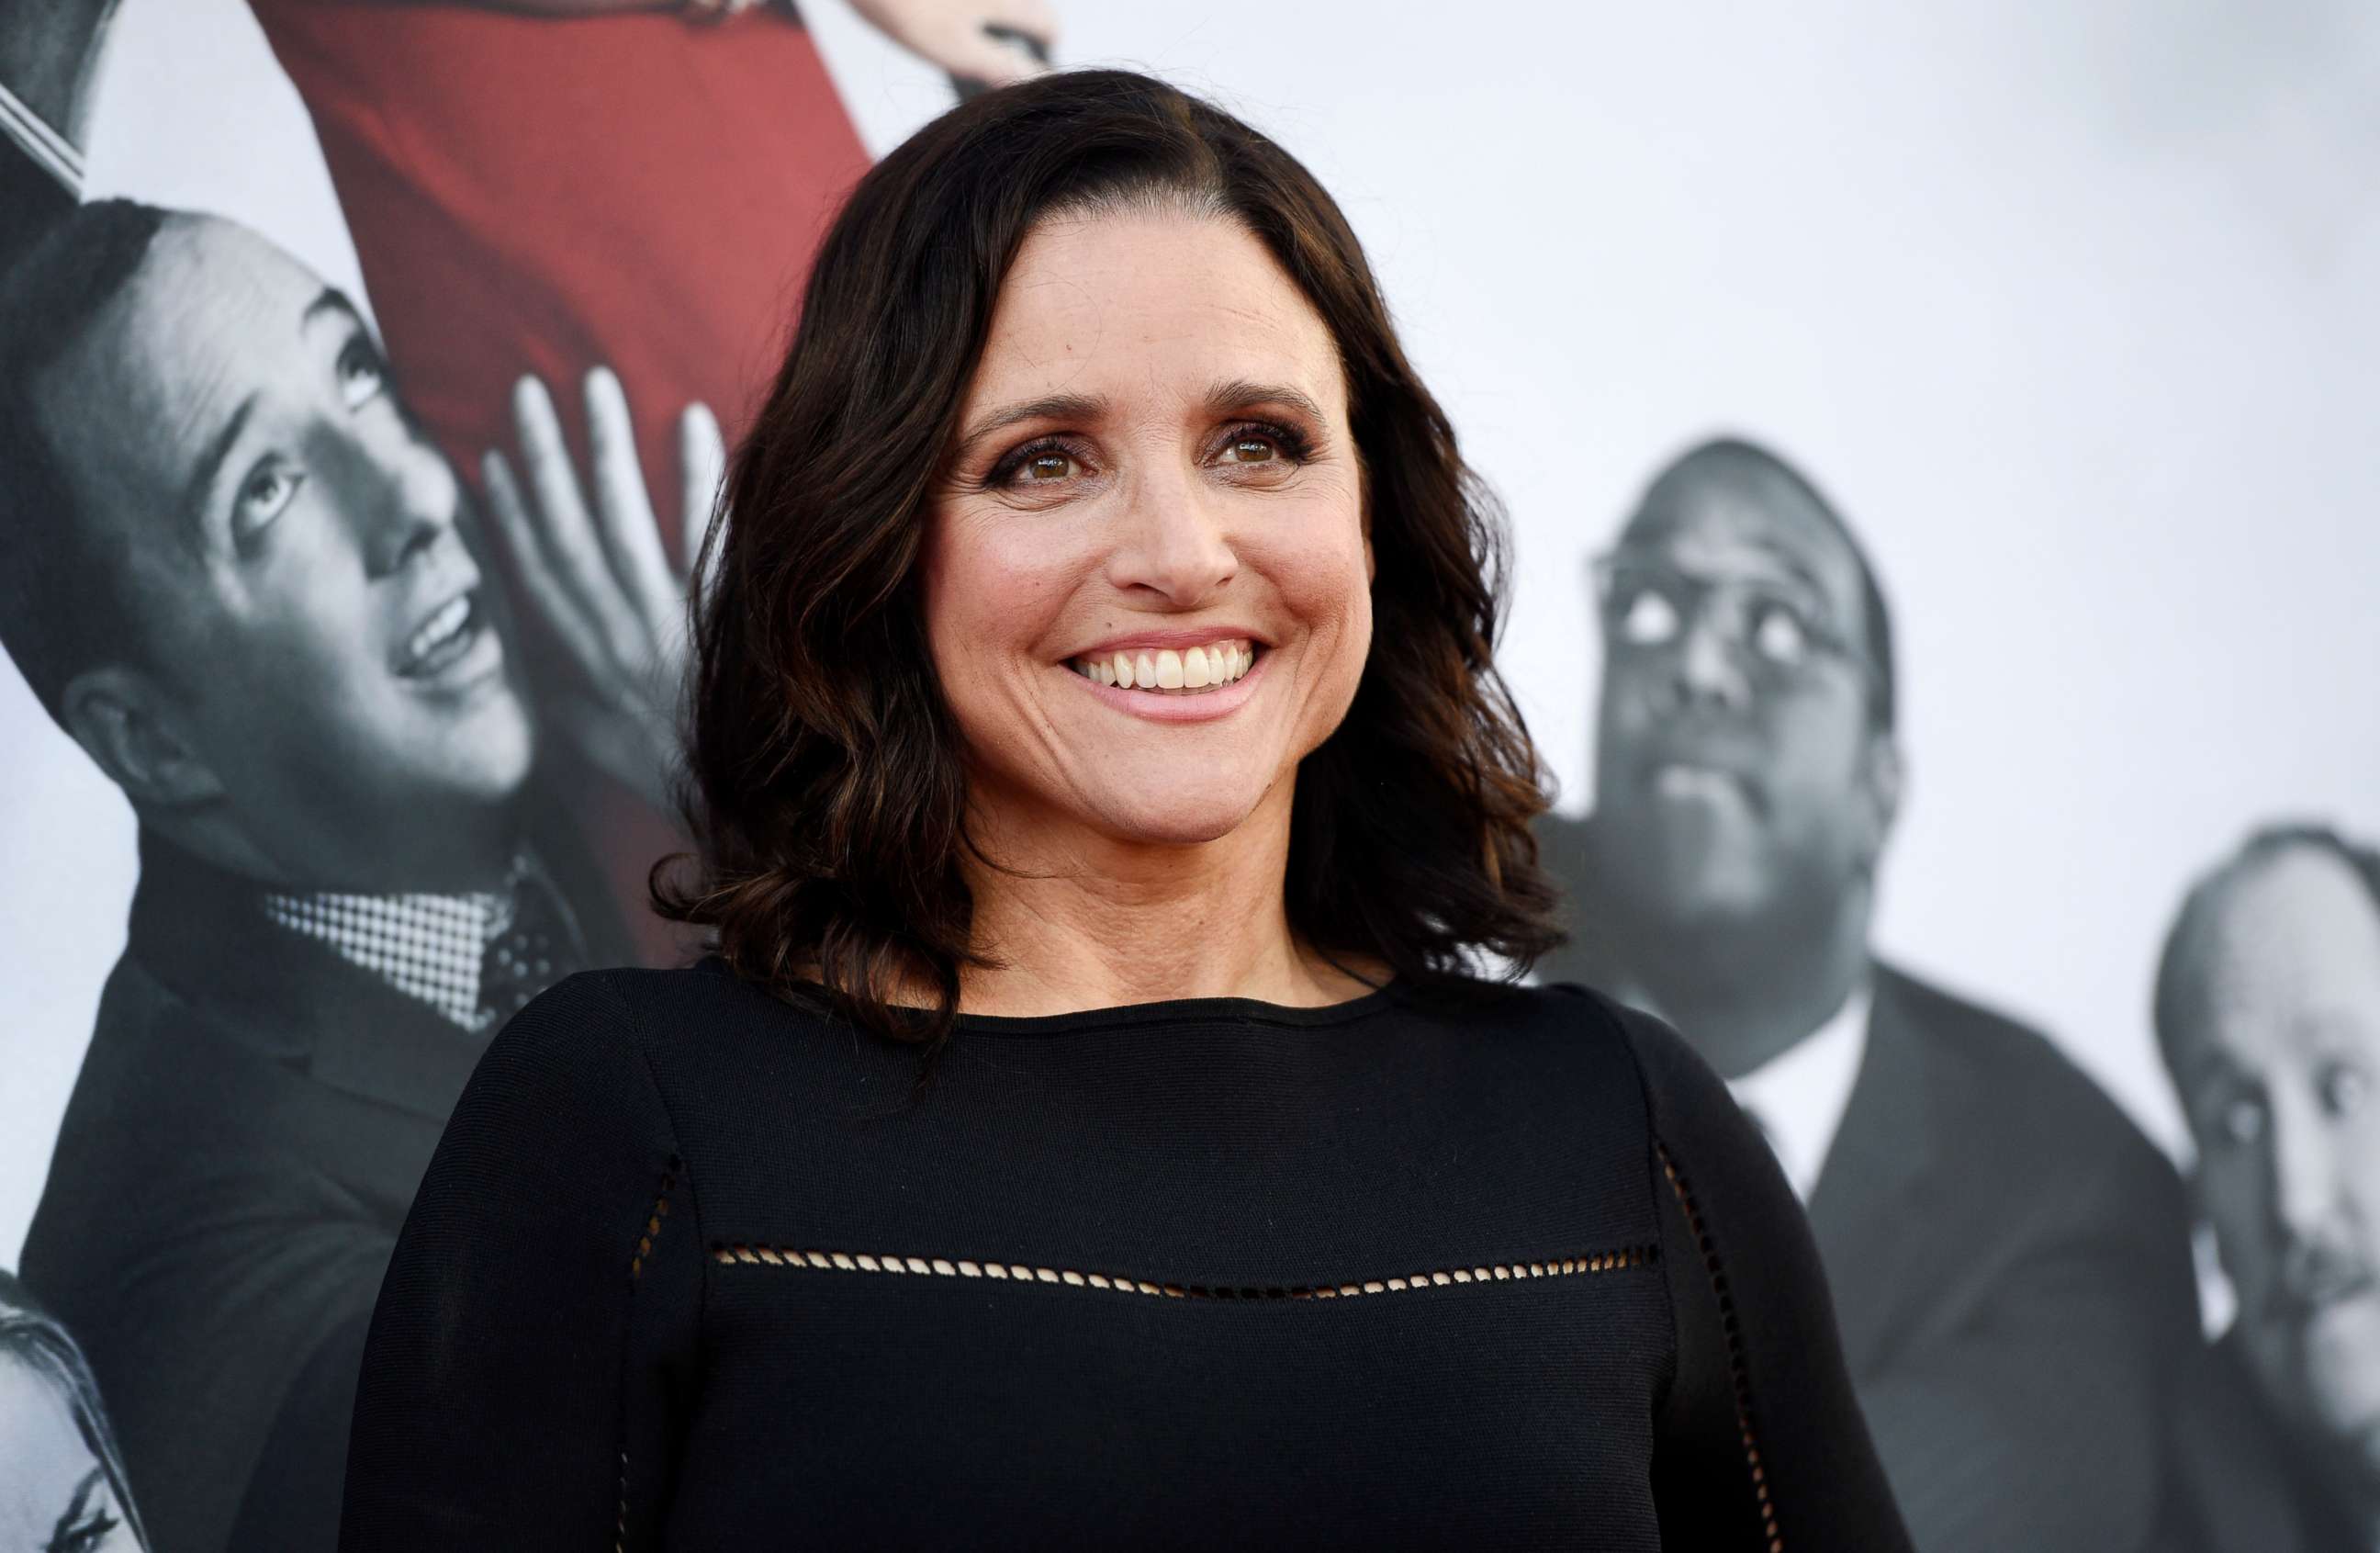 PHOTO: In this May 25, 2017, file photo, Julia Louis-Dreyfus, a cast member in the HBO series "Veep," poses at an Emmy For Your Consideration event for the show at the Television Academy in Los Angeles.